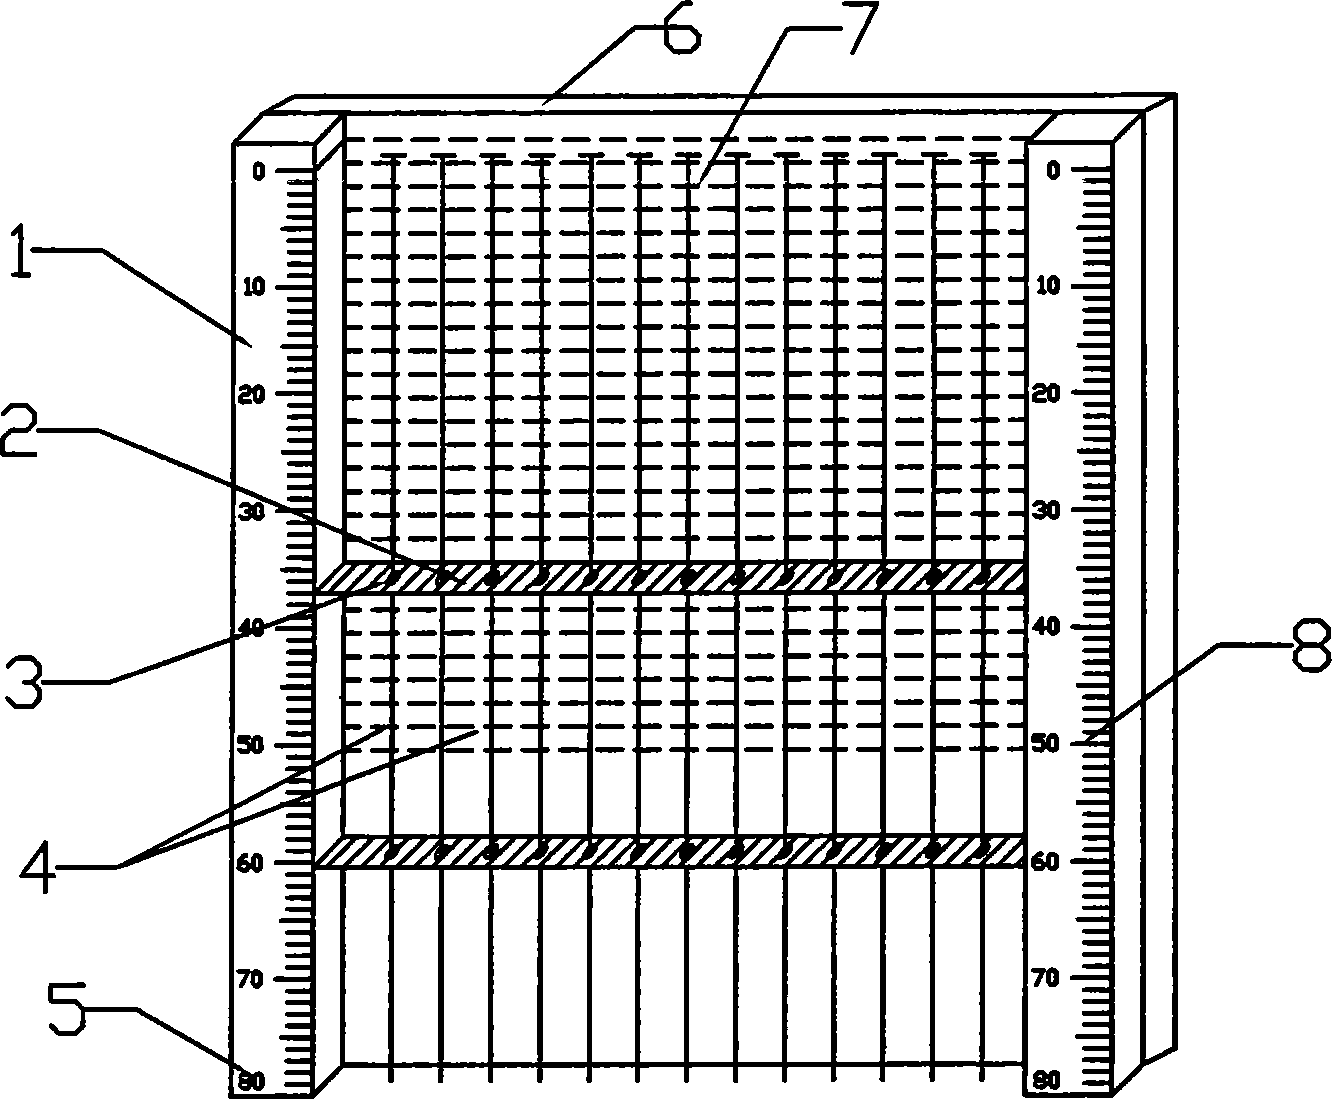 Earth surface micro-configuration measurement mechanism and method of use thereof